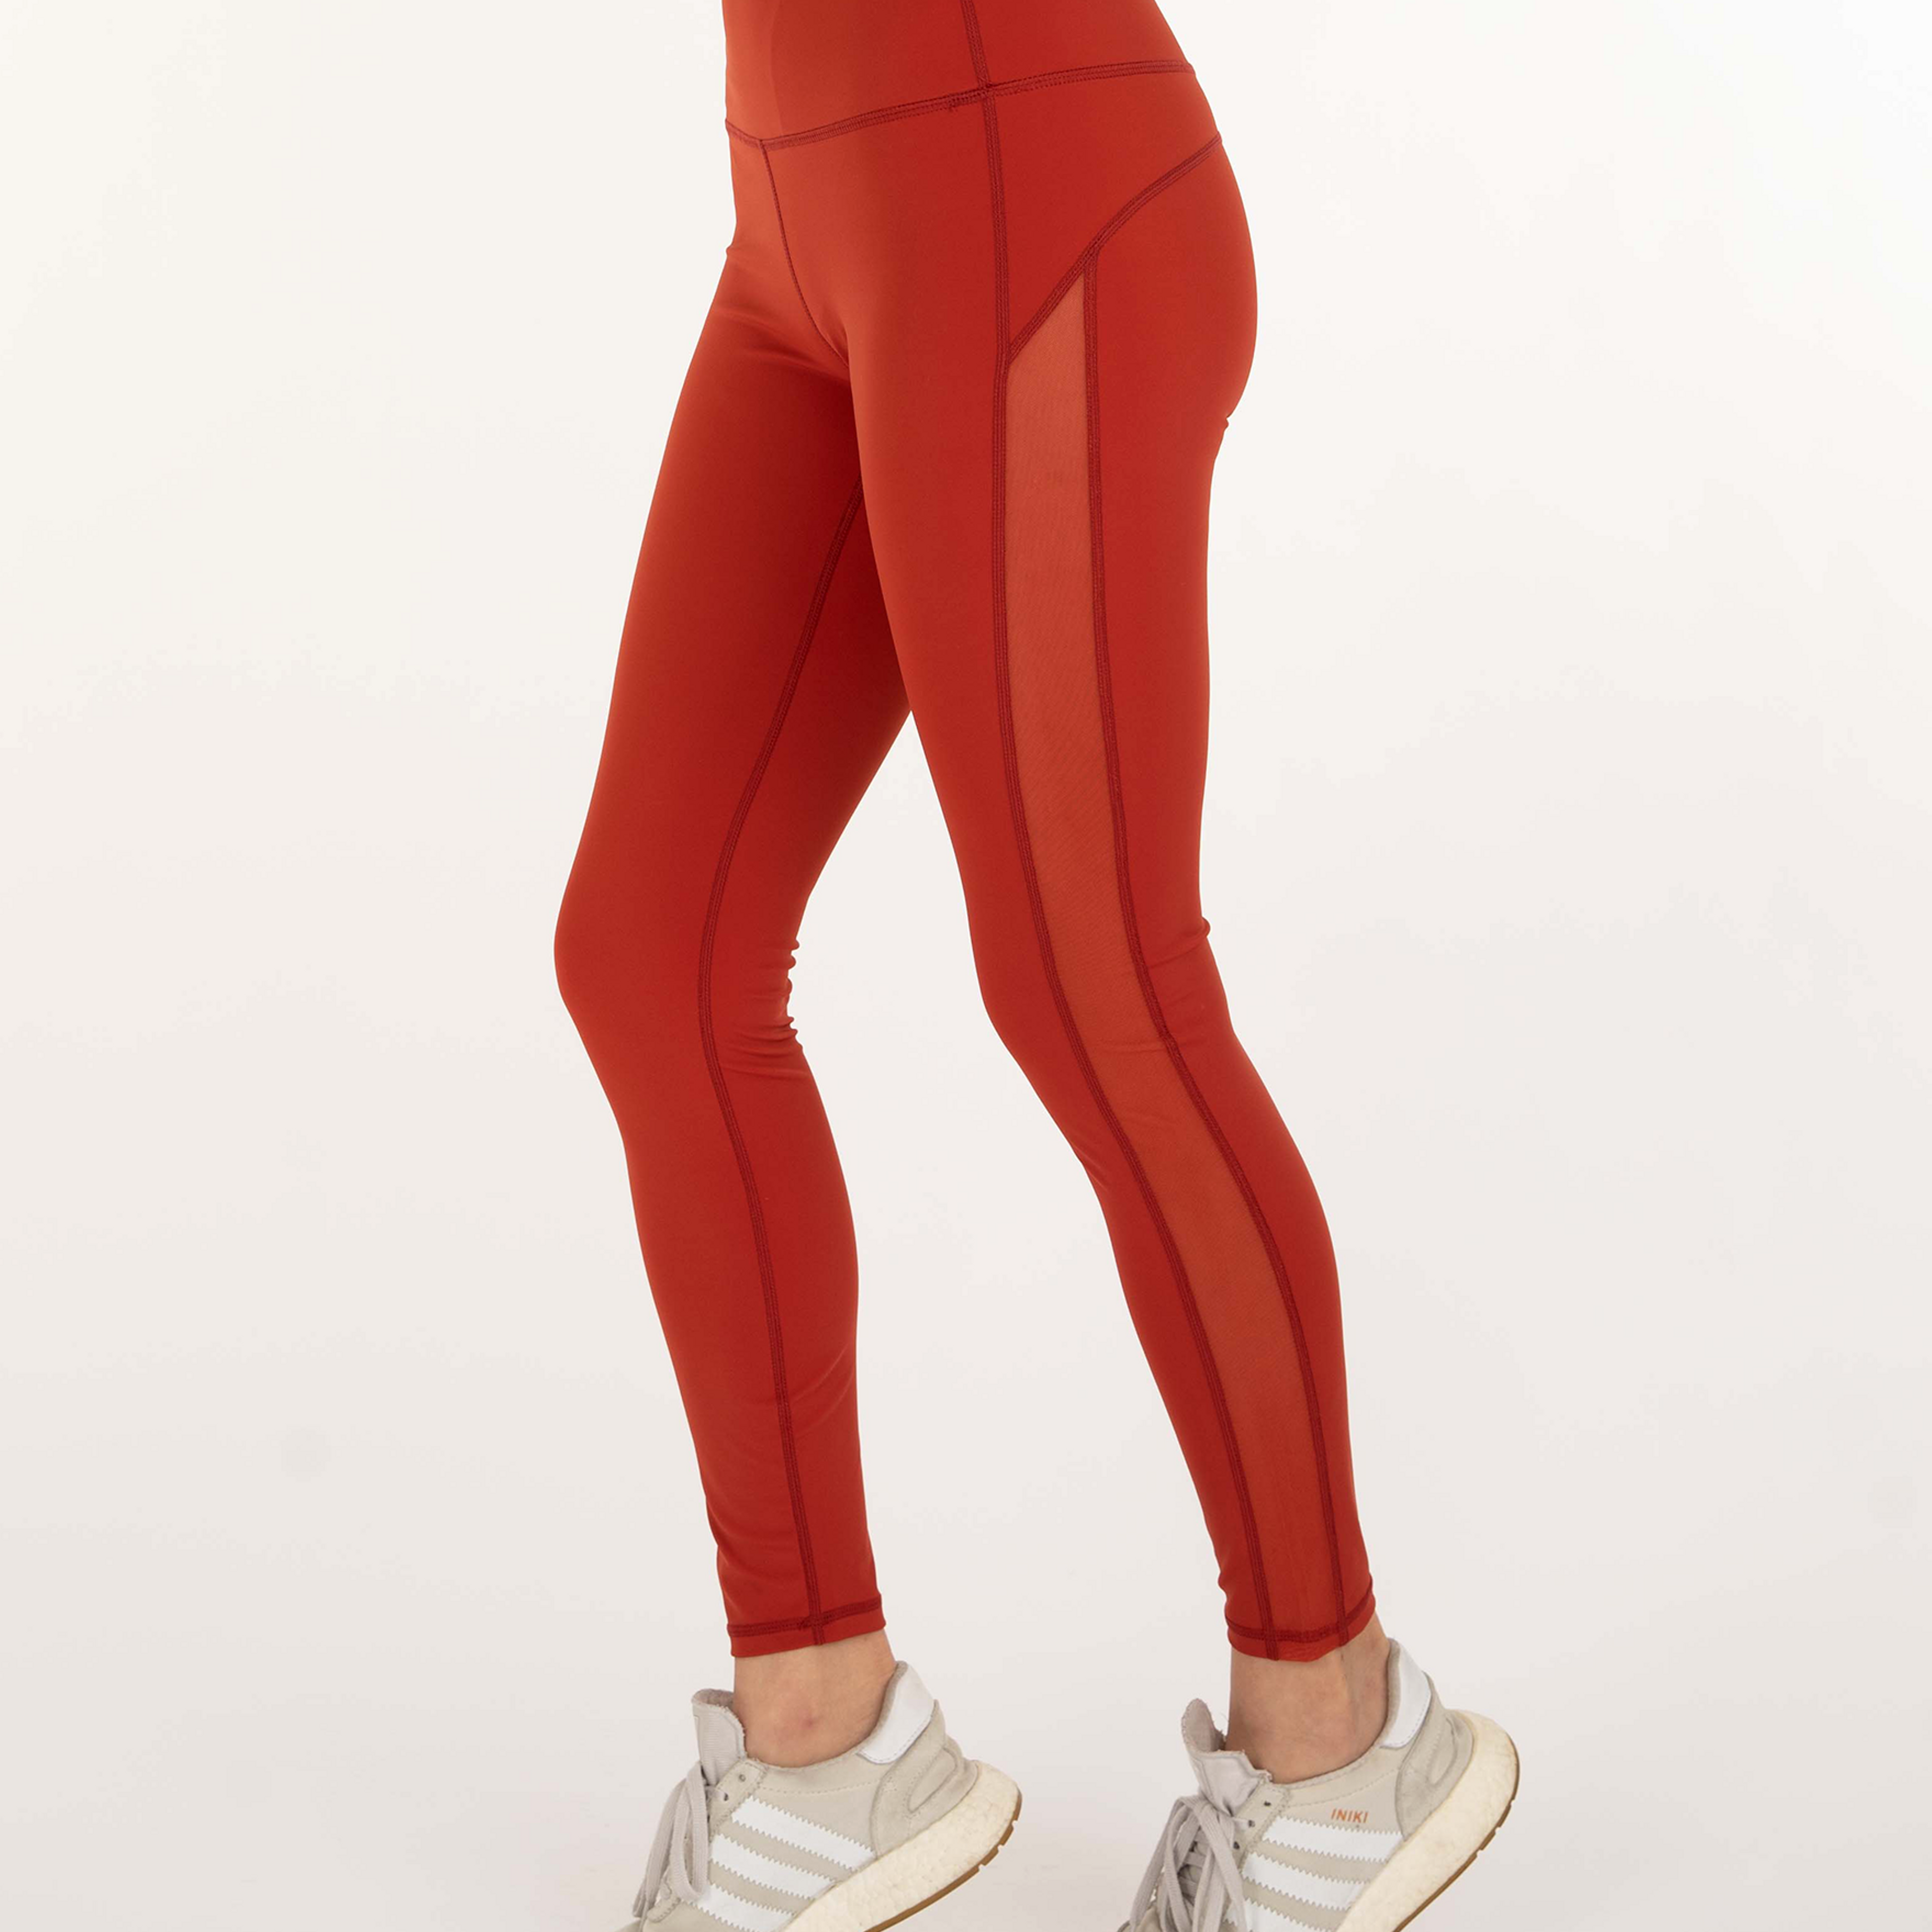 Incline Silkiflex Legging | Cooling and Compressive Mesh High Waist